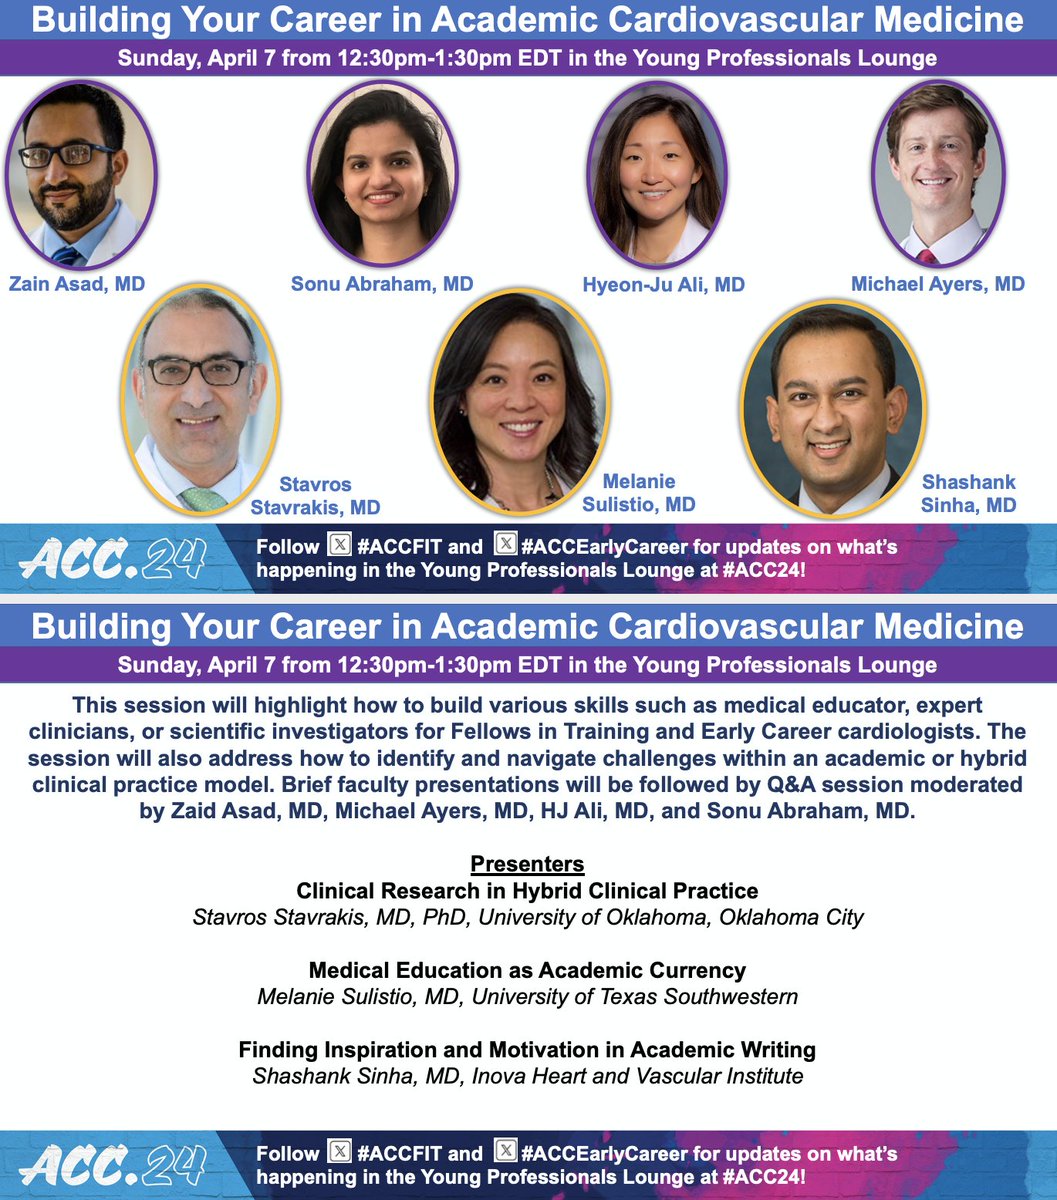 ⭐️ Building Your Career in Academic Cardiovascular Medicine ⭐️ 4/7, 12:30p-1:30p ⭐️ Learn tips & tricks to launch your clinical, research, & MedEd career paths from @StavrosStavrak1, @melsulistio, @ShashankSinhaMD, w/@ZainAsadEP, @sonuabrahammd, @HJRyooAli, @MPAyers_MD #ACC24